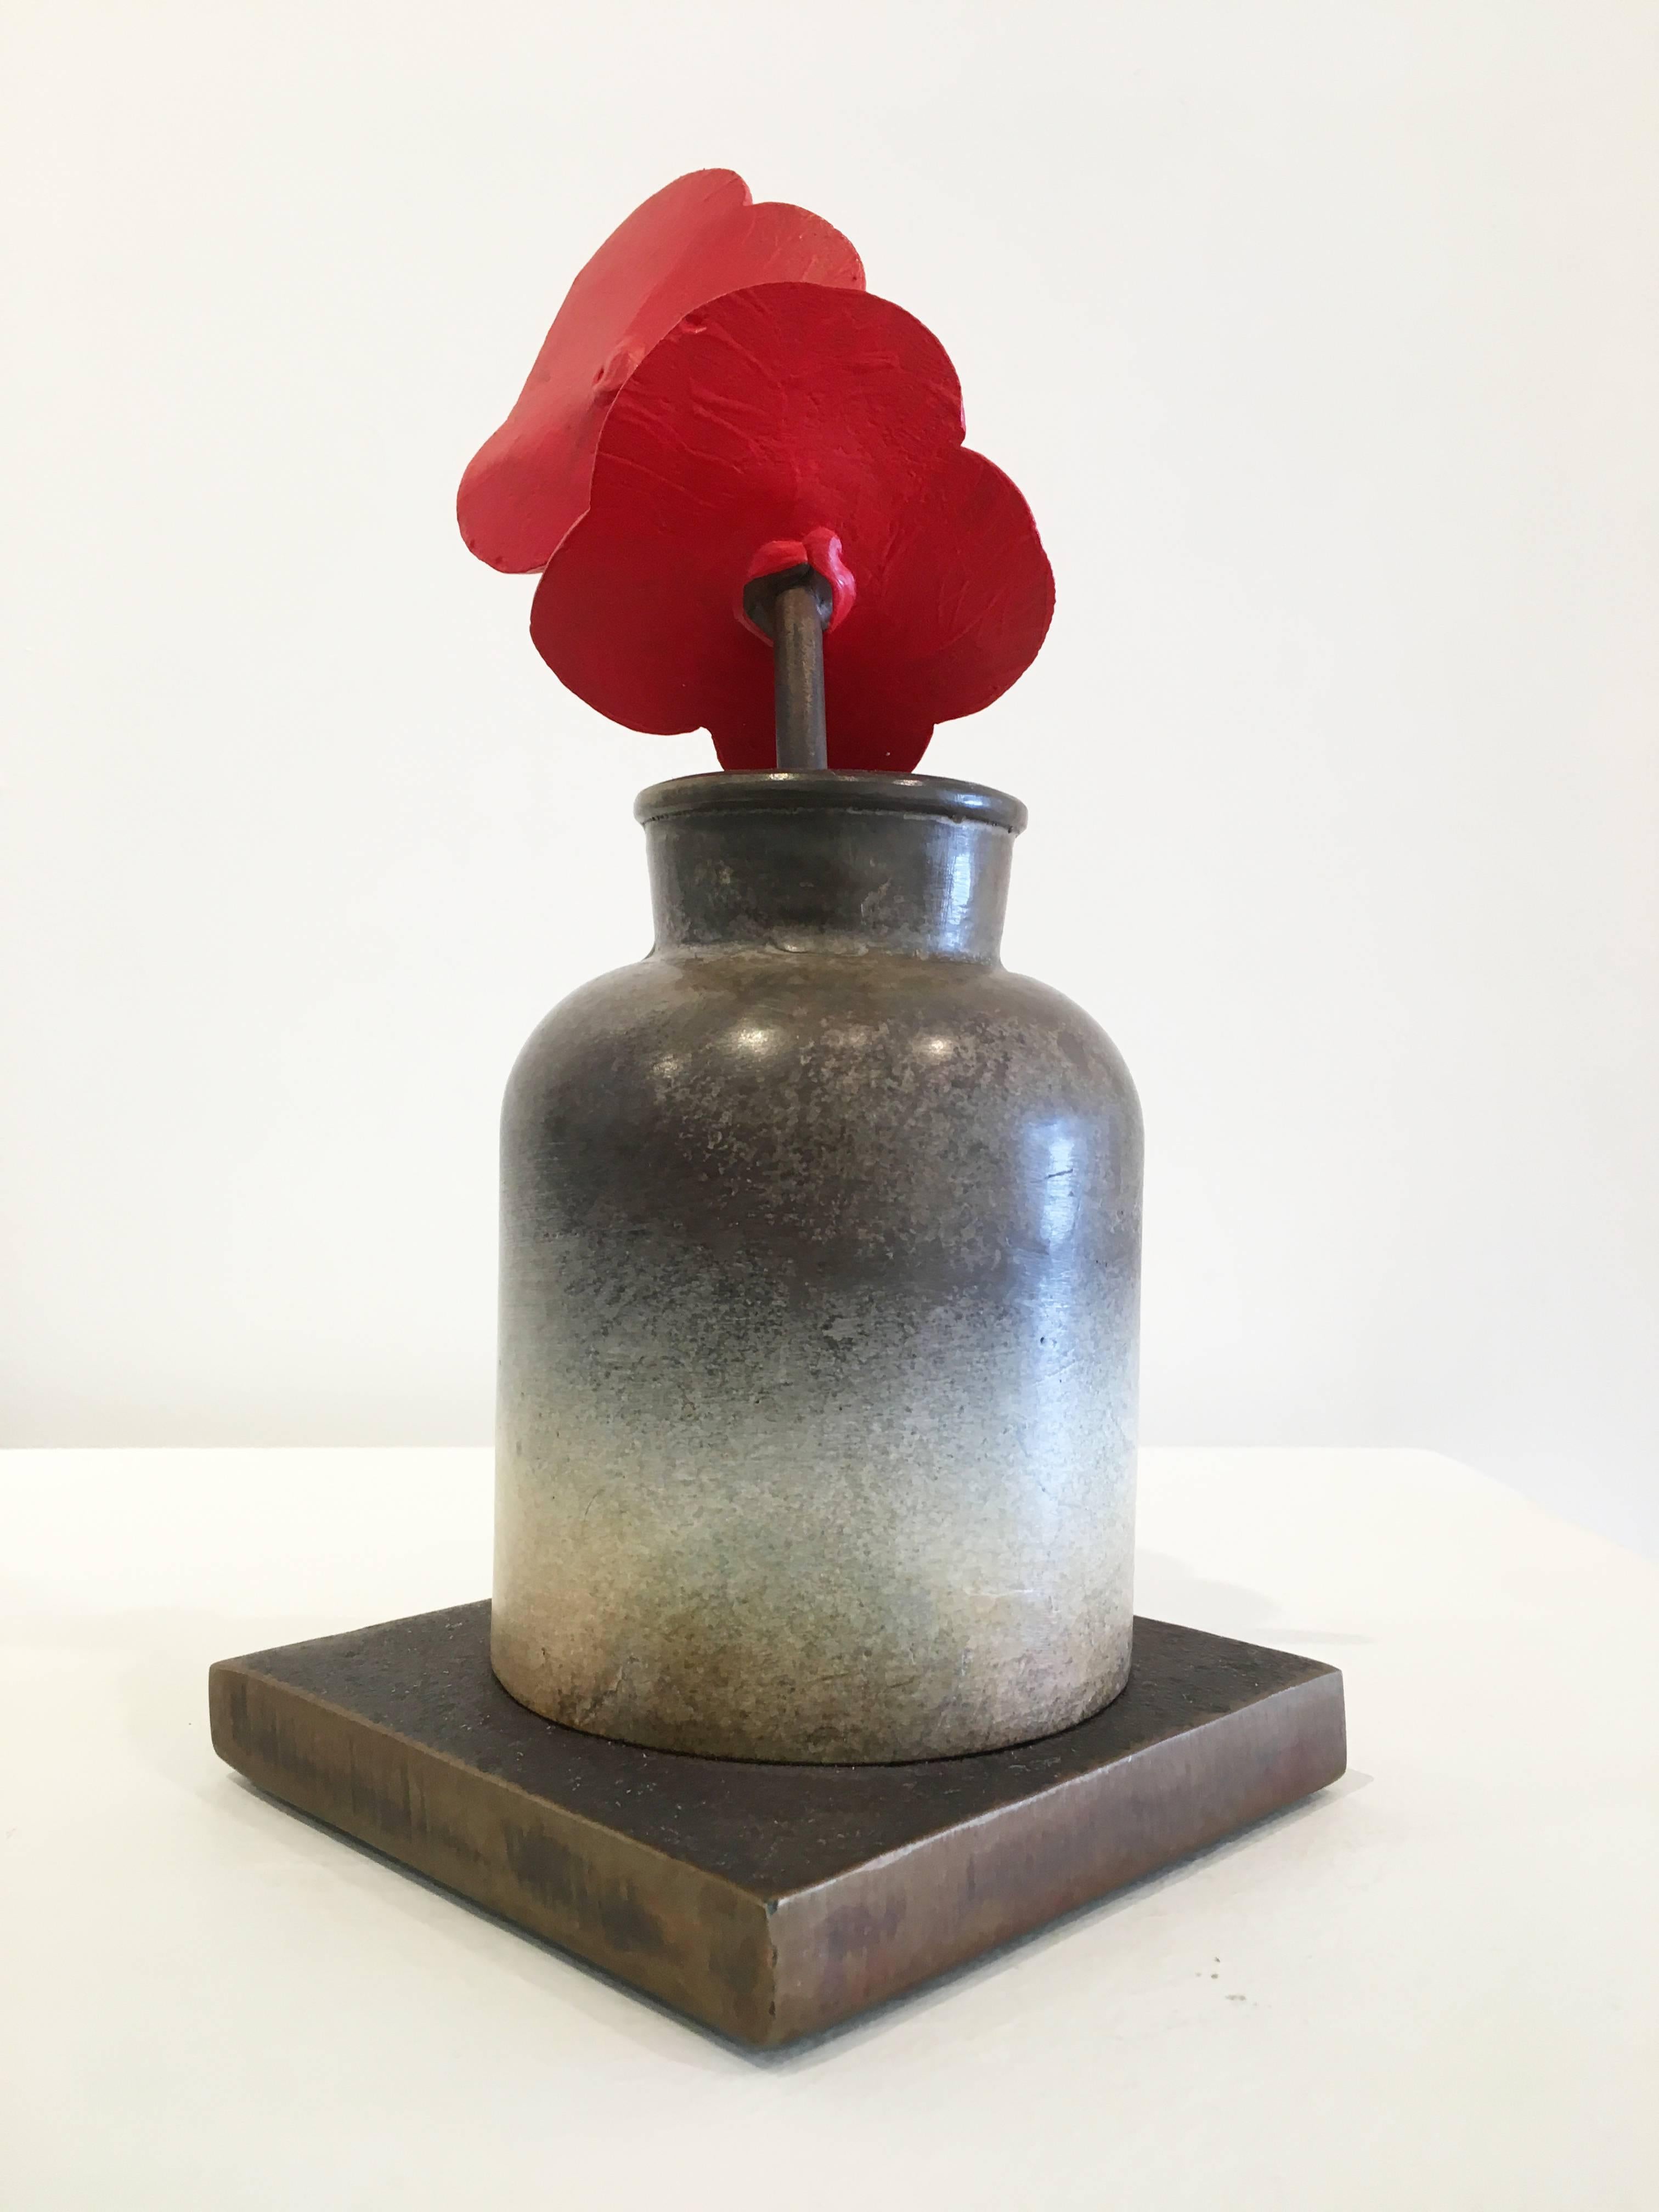 Poppies - Gold Still-Life Sculpture by David Kimball Anderson